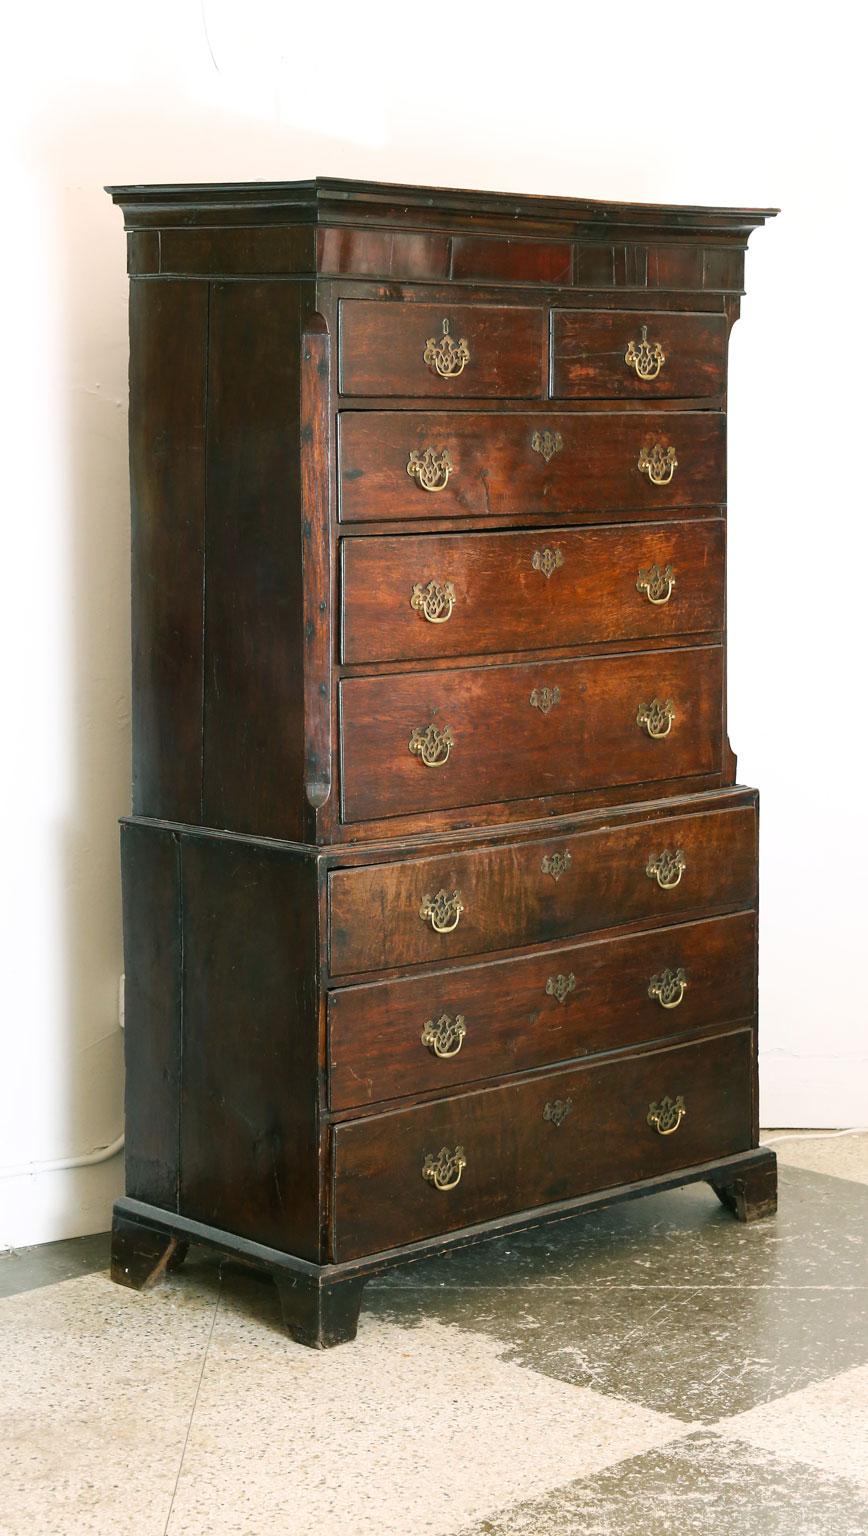 Chippendale chest-on-chest, Classic British country tall chest (chest-on-chest), circa 1770-1780, in English oak with later brass hardware and expected wear, patina and wood shrinkage. Original (or early) thick mahogany veneer in band across top